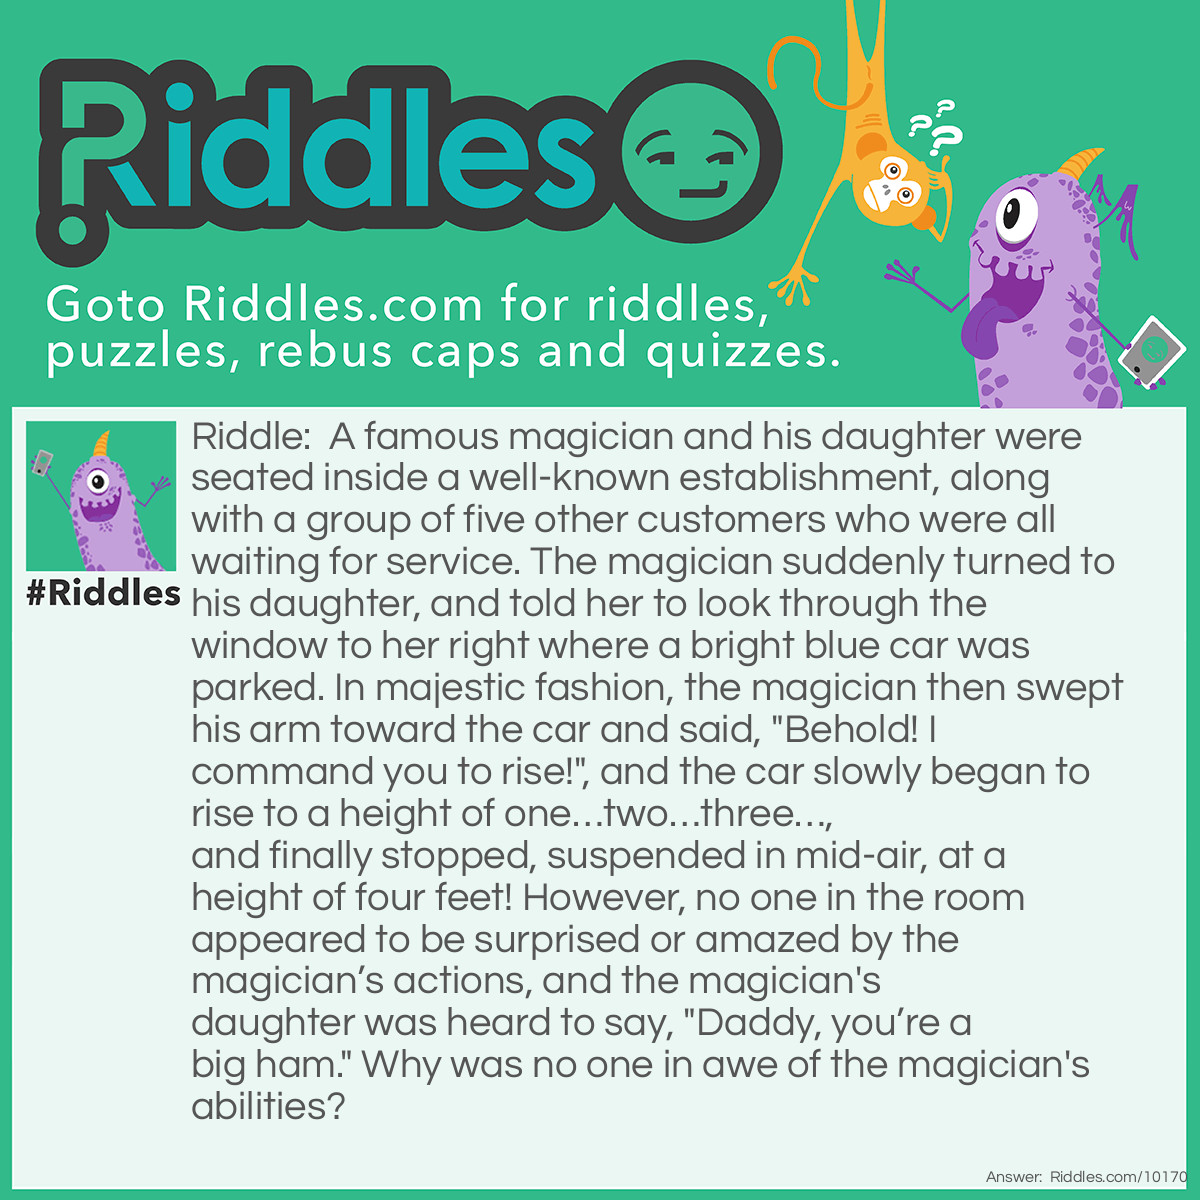 Riddle: A famous magician and his daughter were seated inside a well-known establishment, along with a group of five other customers who were all waiting for service. The magician suddenly turned to his daughter, and told her to look through the window to her right where a bright blue car was parked. In majestic fashion, the magician then swept his arm toward the car and said, "Behold! I command you to rise!", and the car slowly began to rise to a height of one...two...three..., and finally stopped, suspended in mid-air, at a height of four feet! However, no one in the room appeared to be surprised or amazed by the magician's actions, and the magician's daughter was heard to say, "Daddy, you're a big ham." Why was no one in awe of the magician's abilities? Answer: The magician and his daughter were waiting in a local Firestone vehicle repair shop to have their car repaired. The magician noticed that a technician was about to raise a blue car on a hydronic lift to repair it, so he tried to take credit for the levitation. Needless to say, neither the other customers or his daughter were impressed.